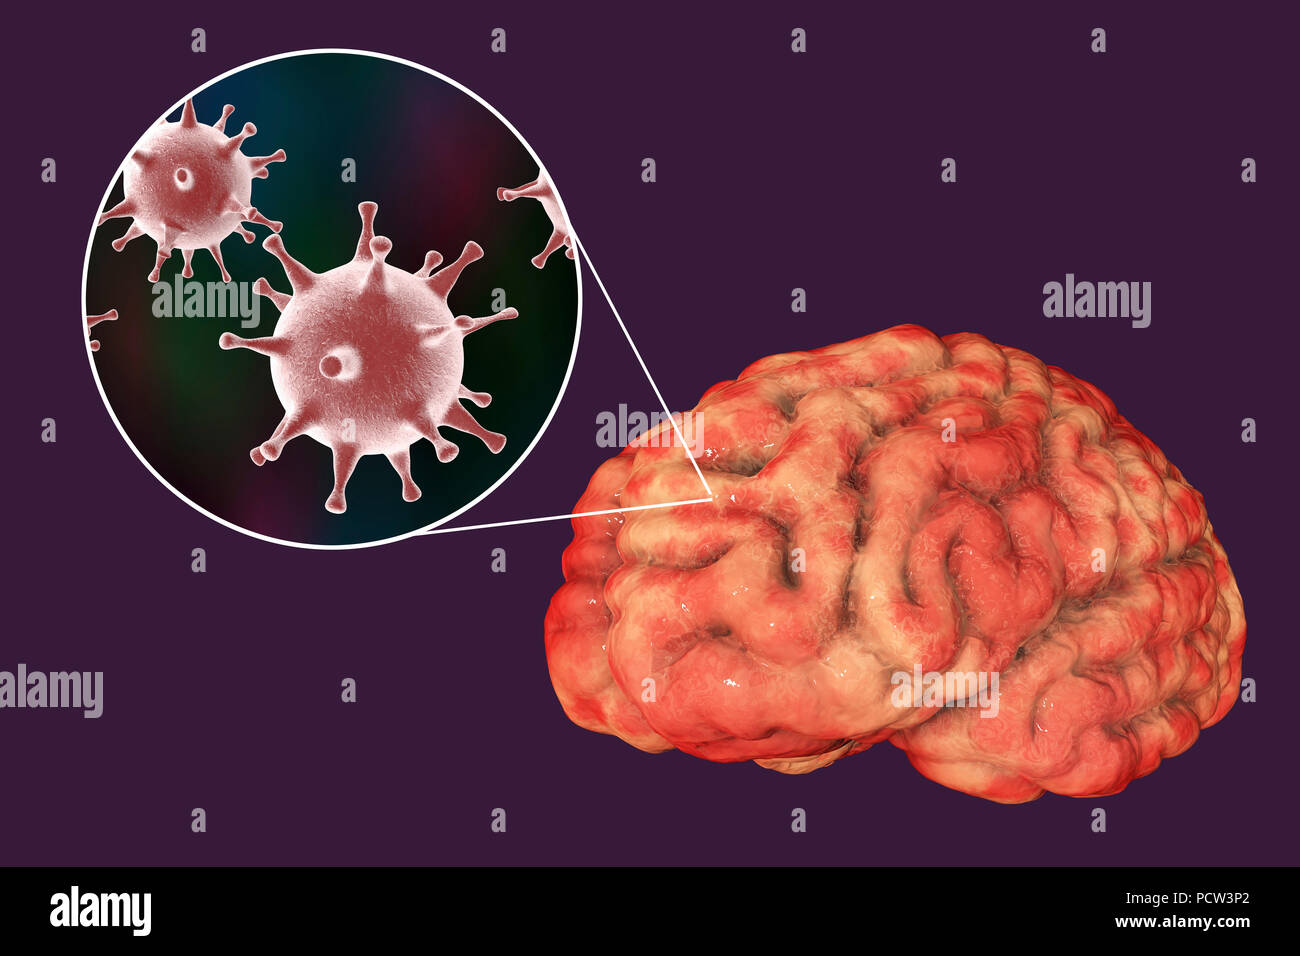 Brain infection caused by Herpes viruses, computer illustration. Stock Photo